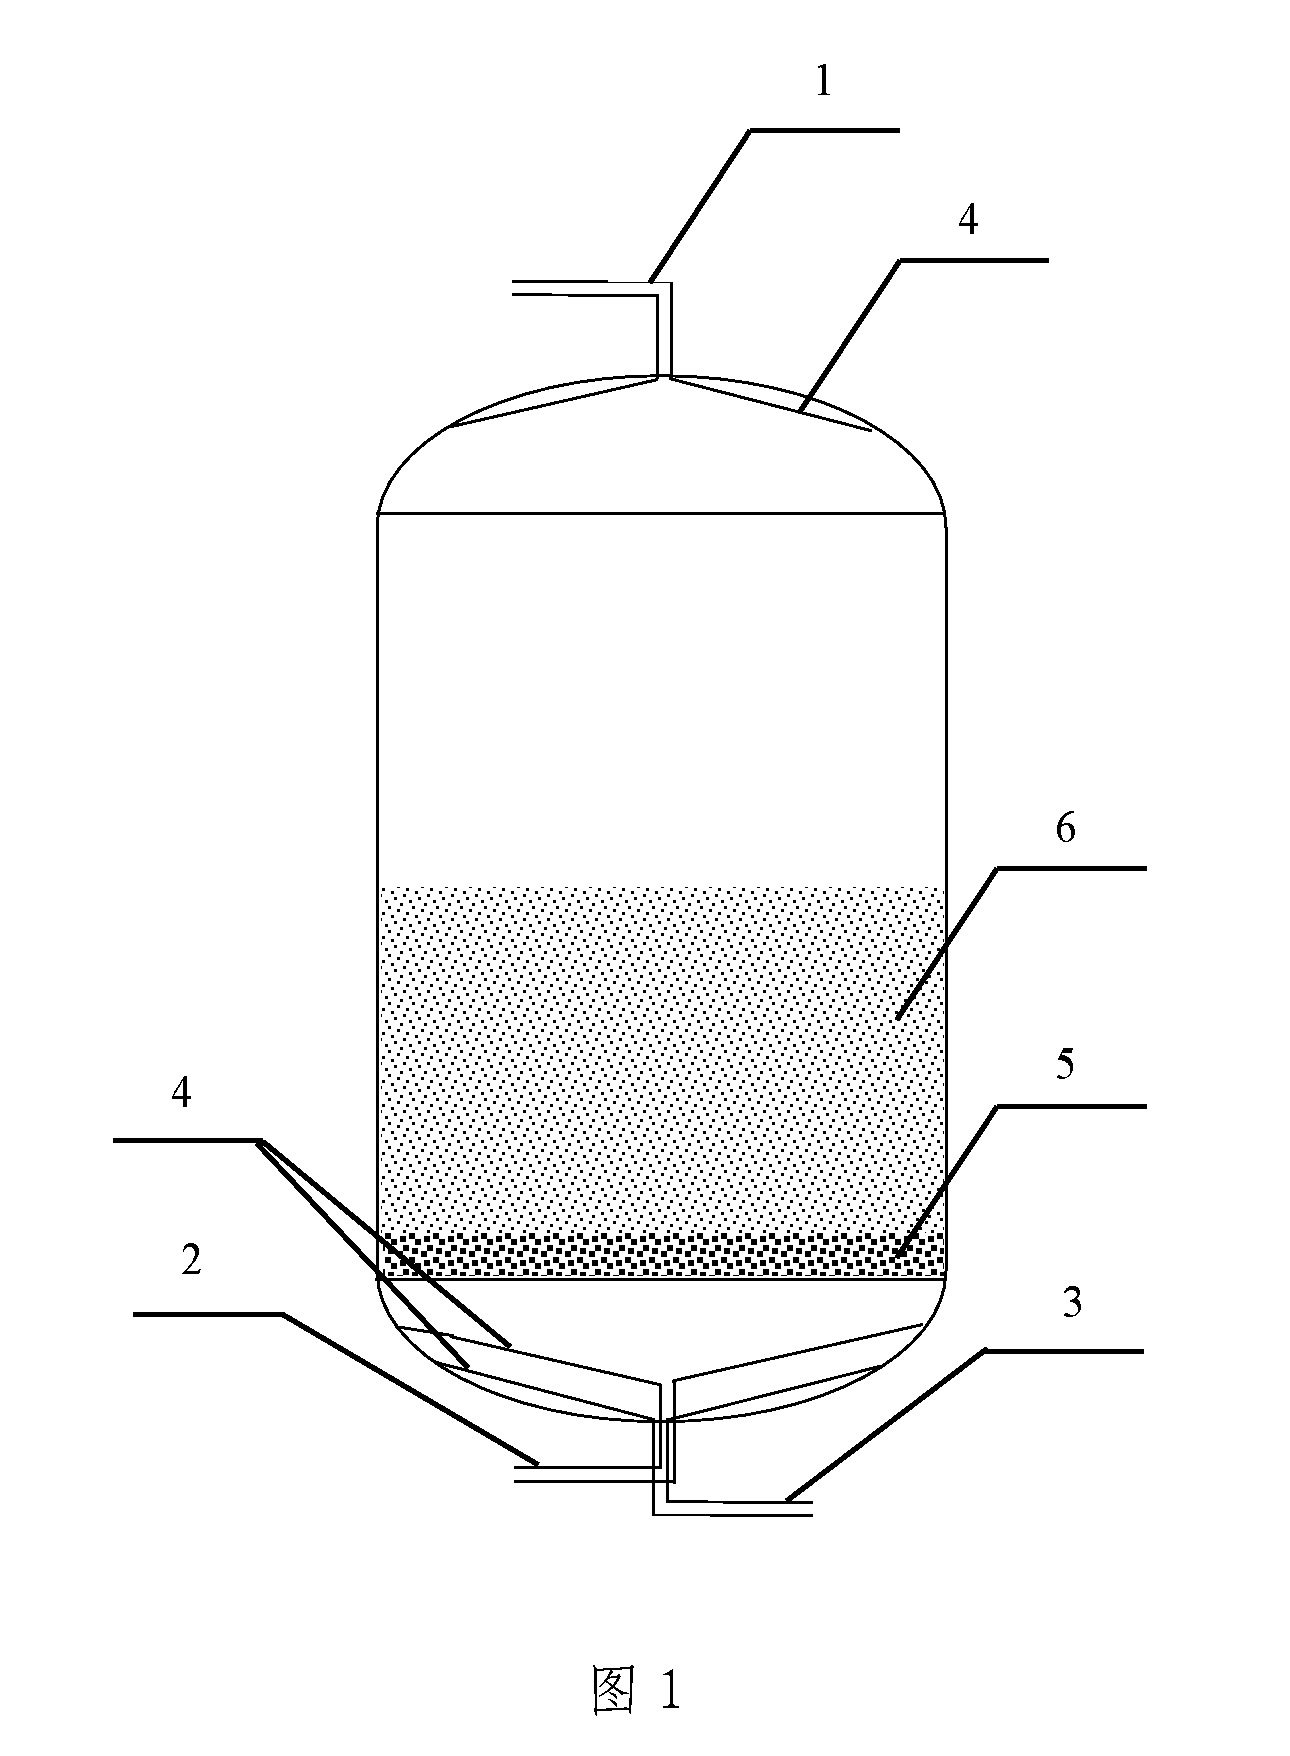 The ferric and manganese binary oxide based adsorbent, and the methods for the preparation and applicaiton of the adsorbent